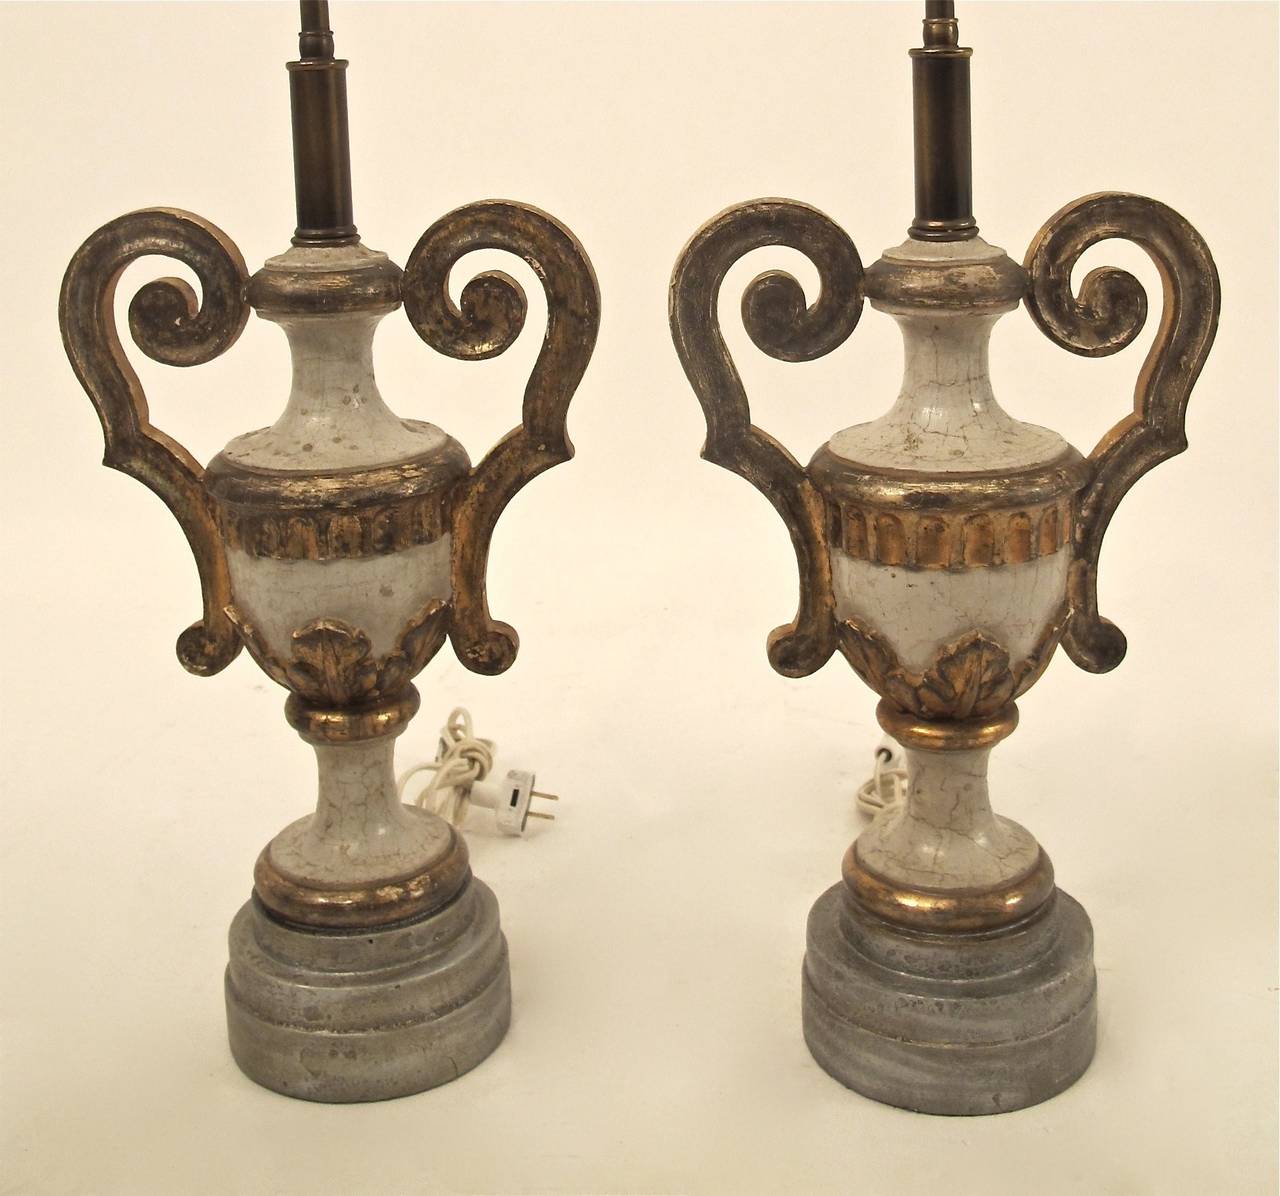 A pair of carved wood, painted and parcel-gilt urns converted to lamps. Very pale blue paint with parcel silver and gold gilt detail on silver leaf custom-made bases. Recently re-wired. Shades not included.